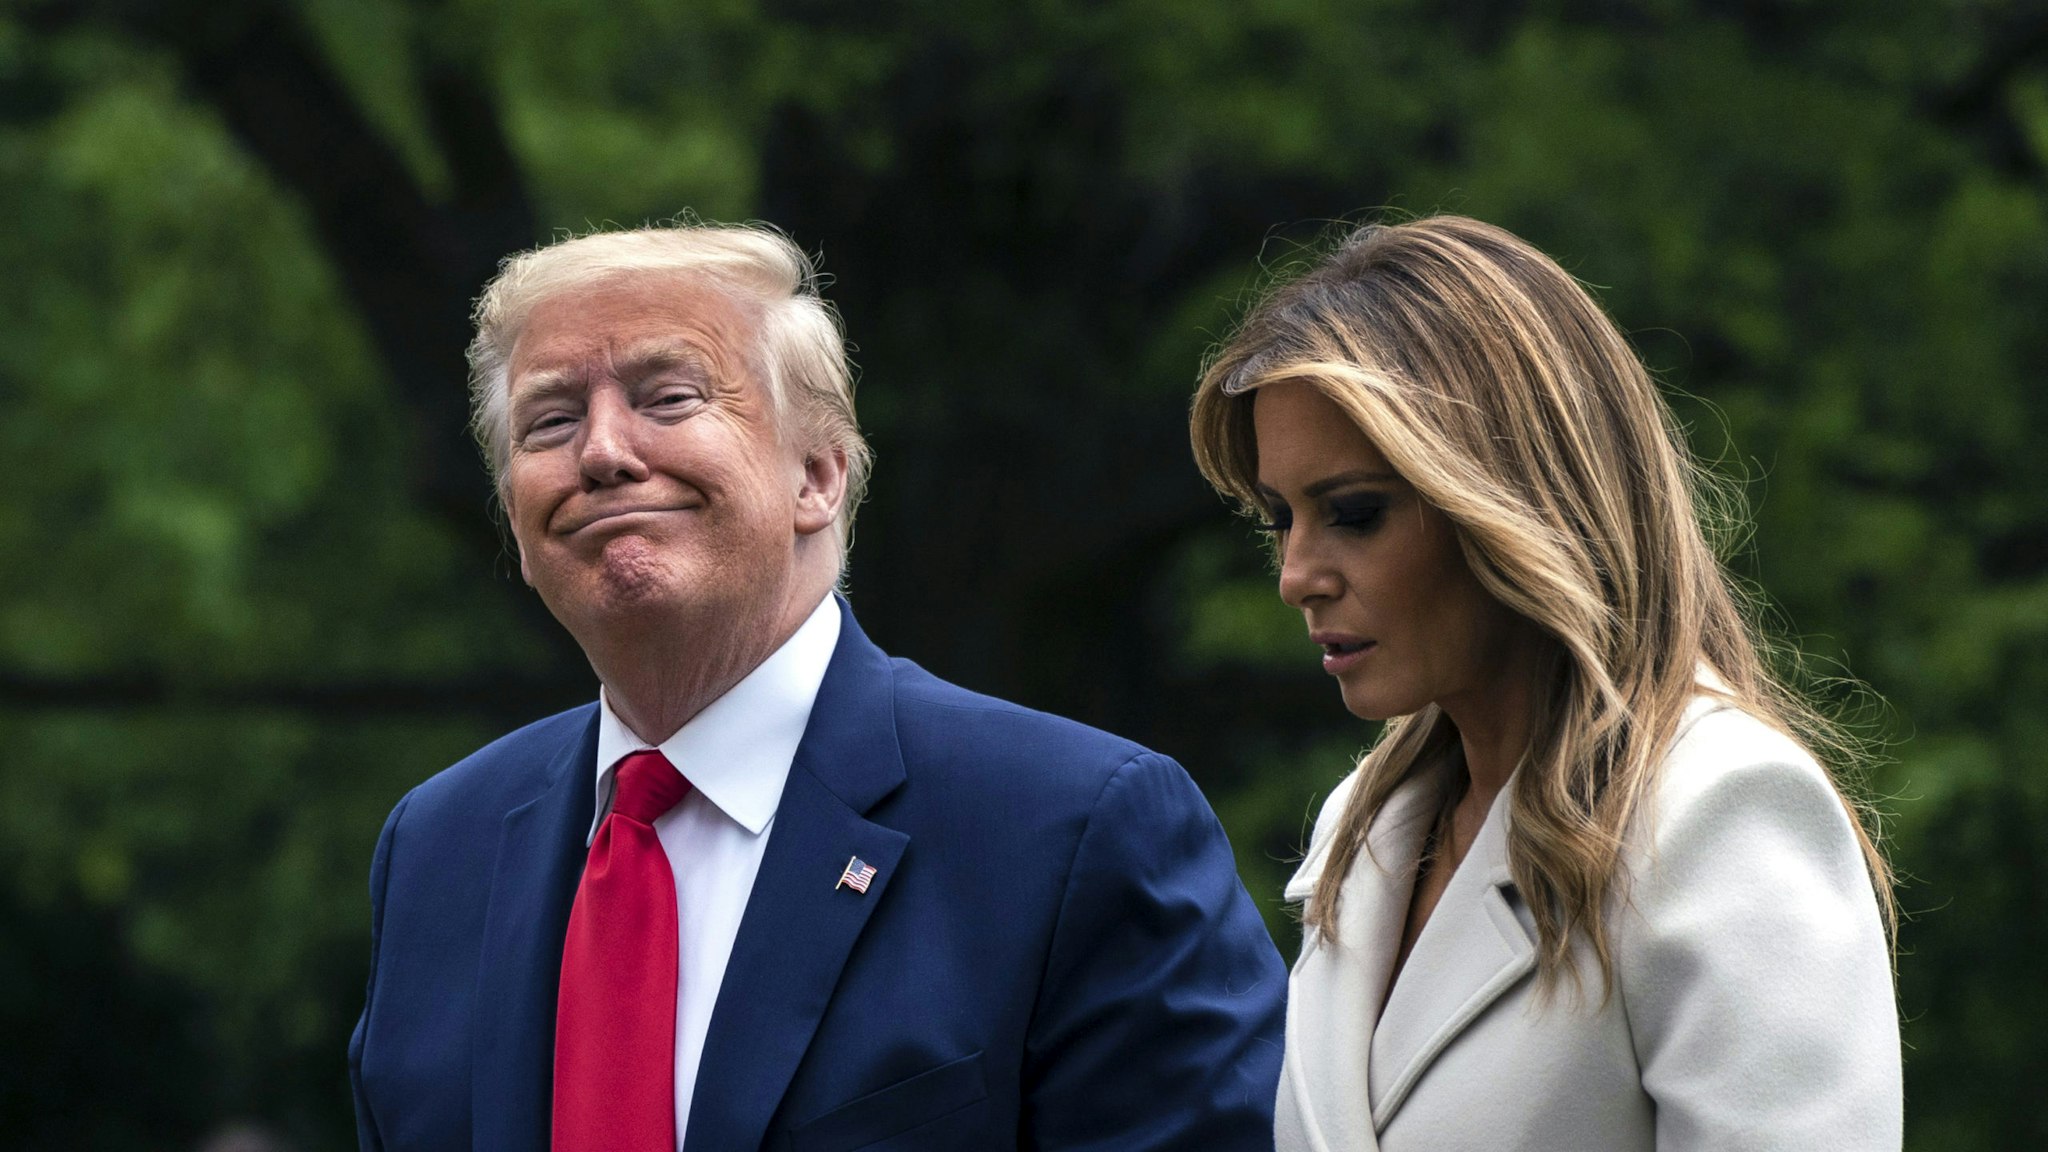 WASHINGTON, DC - MAY 25: U.S. President Donald Trump and first lady Melania Trump arrive to the South Lawn of the White House after a trip to Baltimore, Maryland on May 25, 2020 in Washington, DC. The Trumps attended a Memorial Day ceremony at the Fort McHenry National Monument and Historic Shrine despite objections by Baltimore Mayor Bernard C. Jack Young, whose residents remain under a stay-at-home order due to the coronavirus.